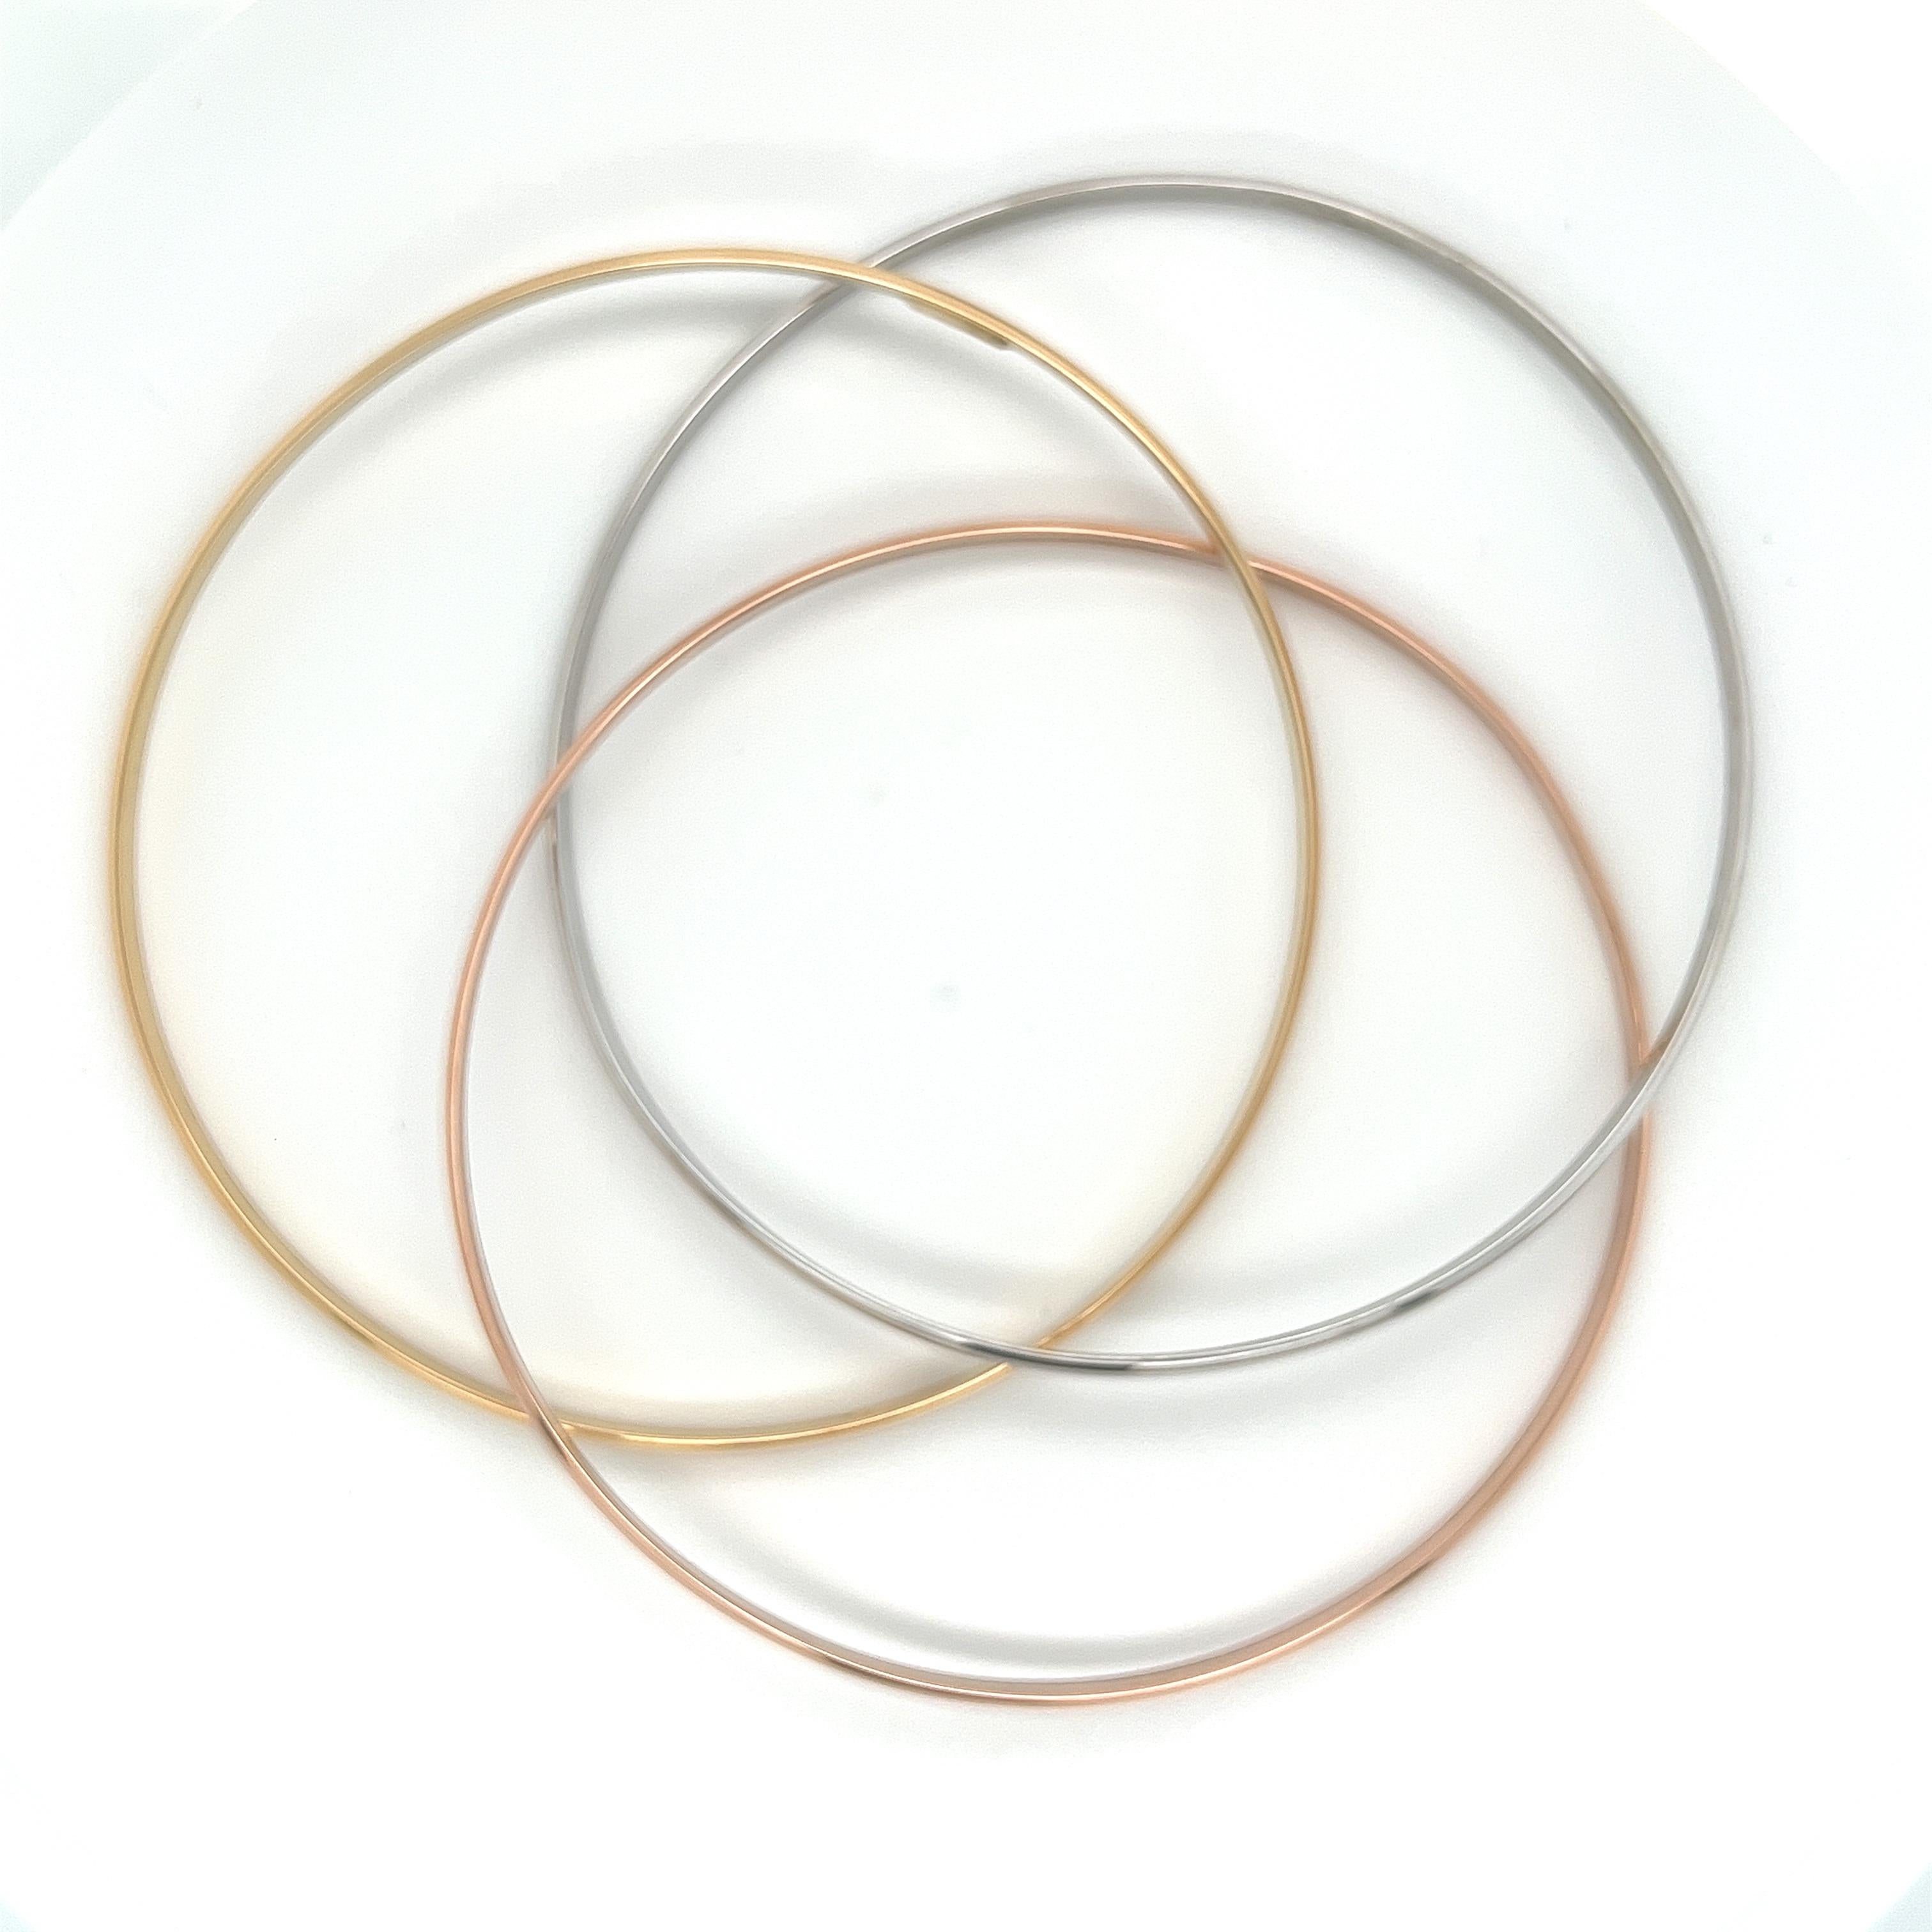 3 piece, tri-color bangle in 18 karat gold. Rose, yellow, and white gold welded in unison to create a gorgeous and classic bangle. This bangle is made in 18k solid gold with a protective double rhodium plating for long-lasting shine. Polished finish